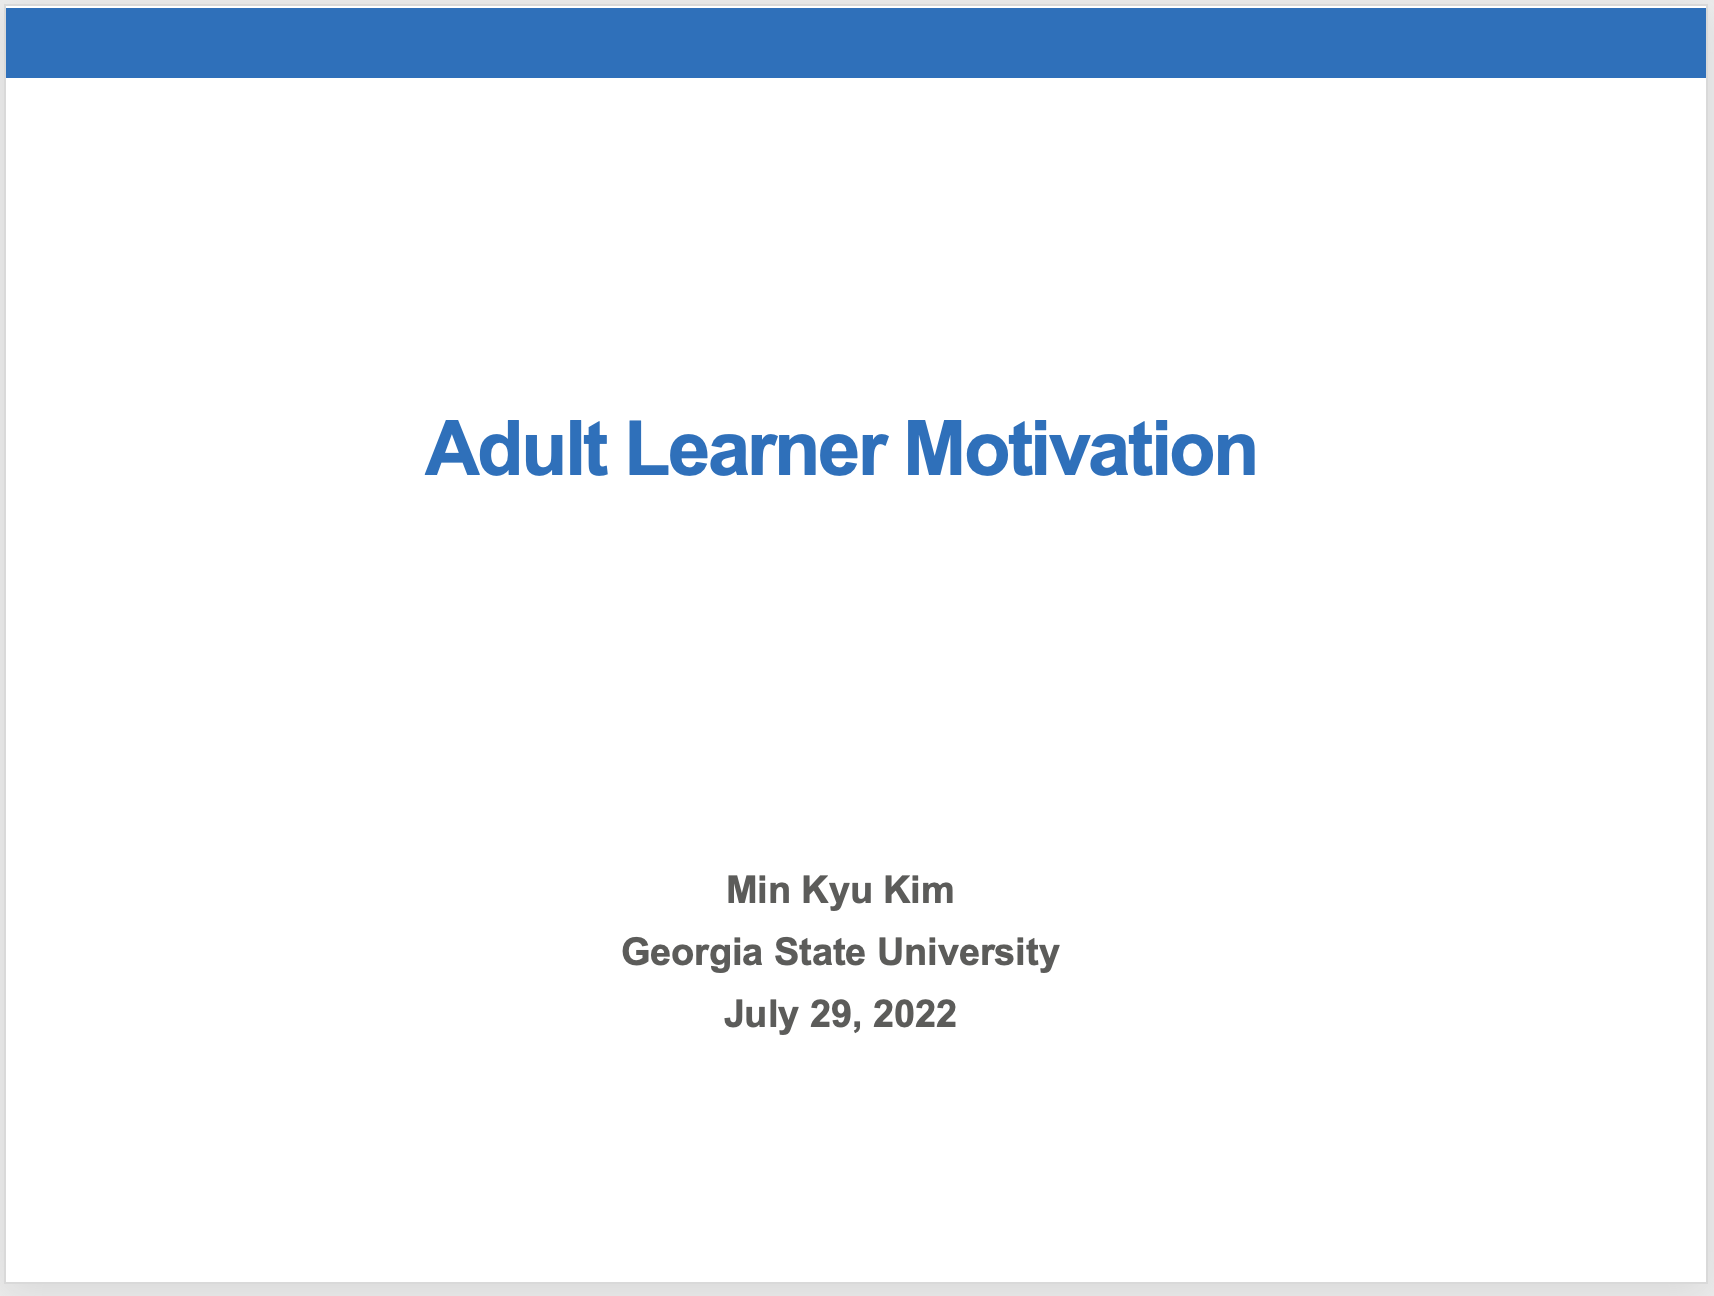 Min Kyu Kim was invited to present his work on adult learner motivation